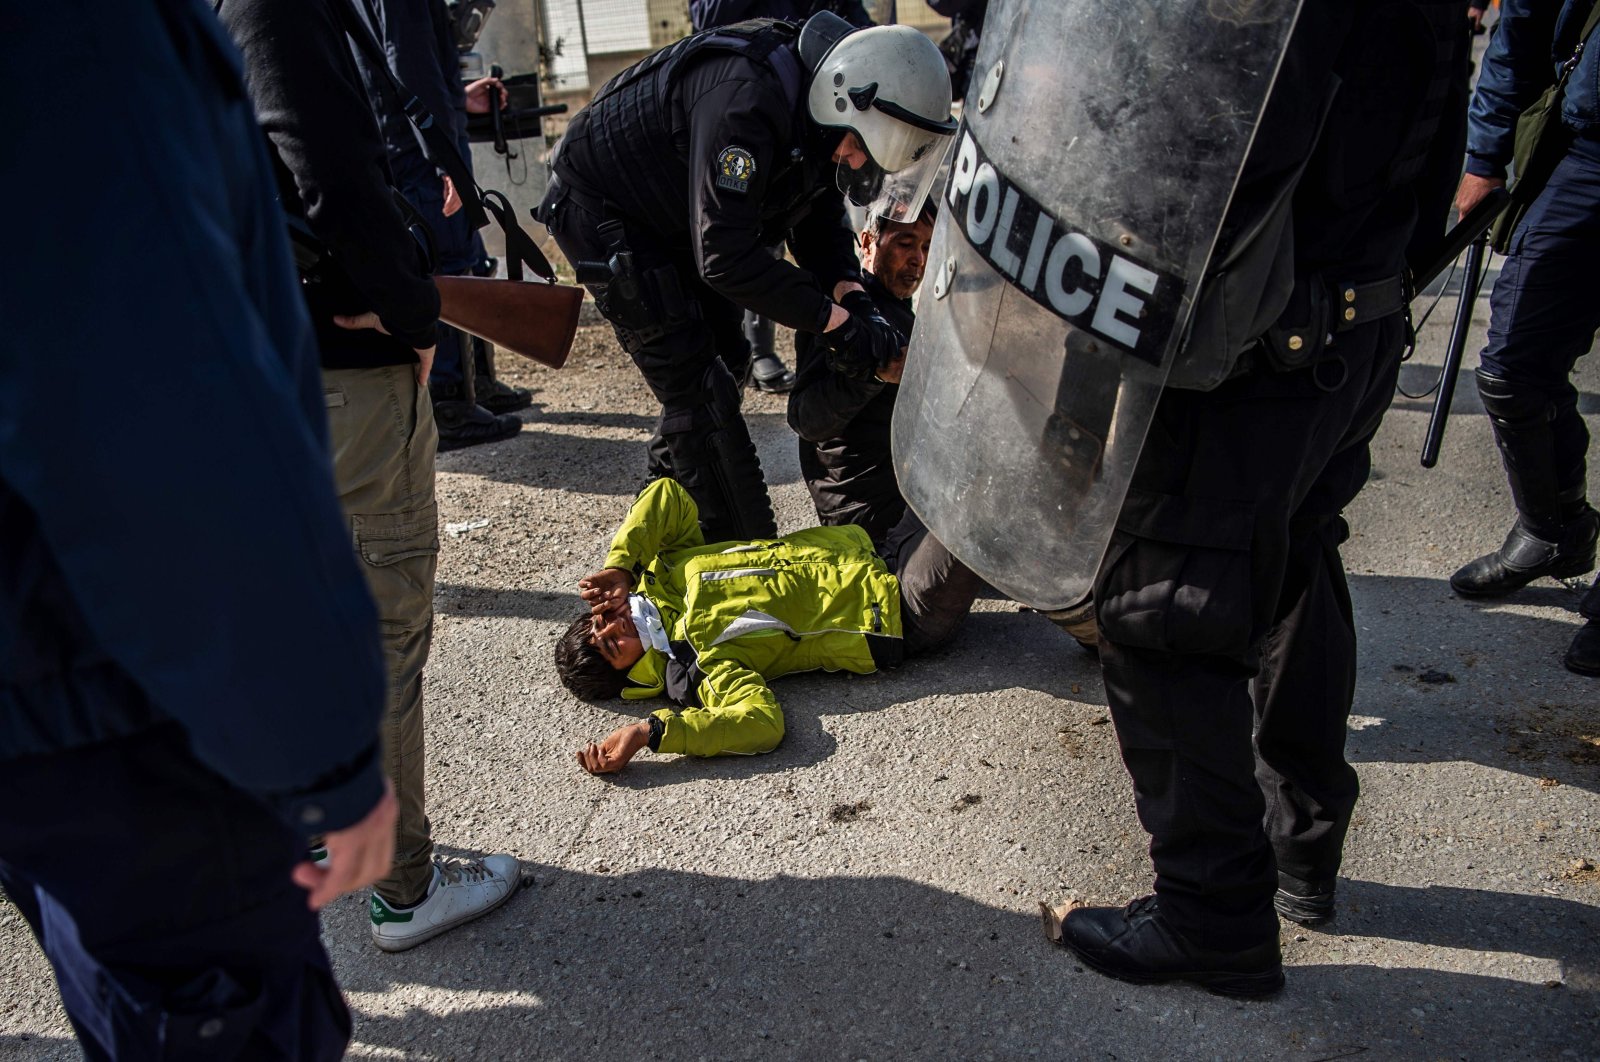 Greek riot police detain a migrant teen during clashes near the Moria camp for refugees and migrants, on the island of Lesbos, Greece, March 2, 2020. (AFP Photo)